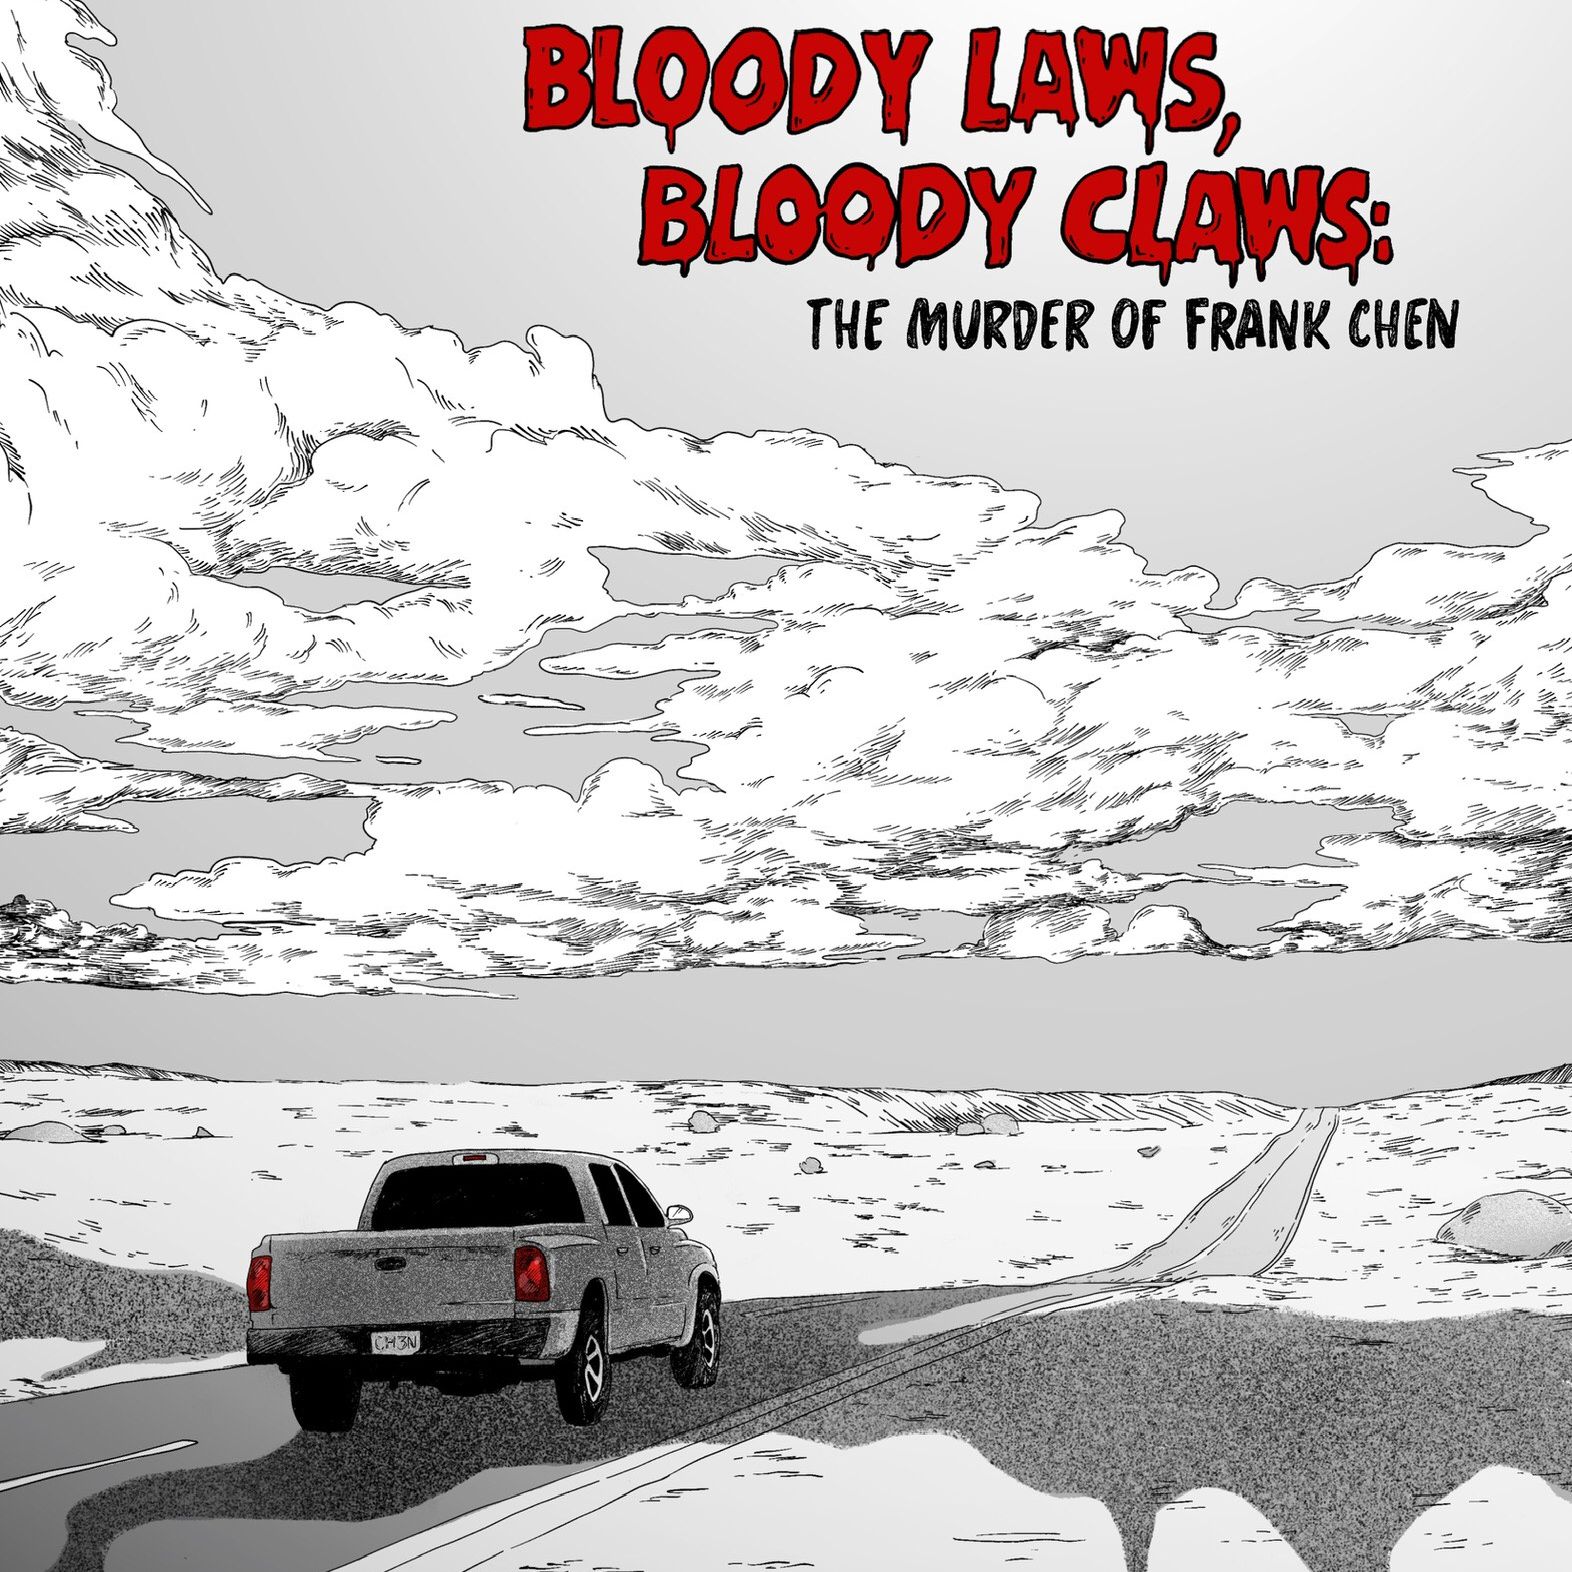 177 - Bloody Laws, Bloody Claws: The Murder of Frank Chen